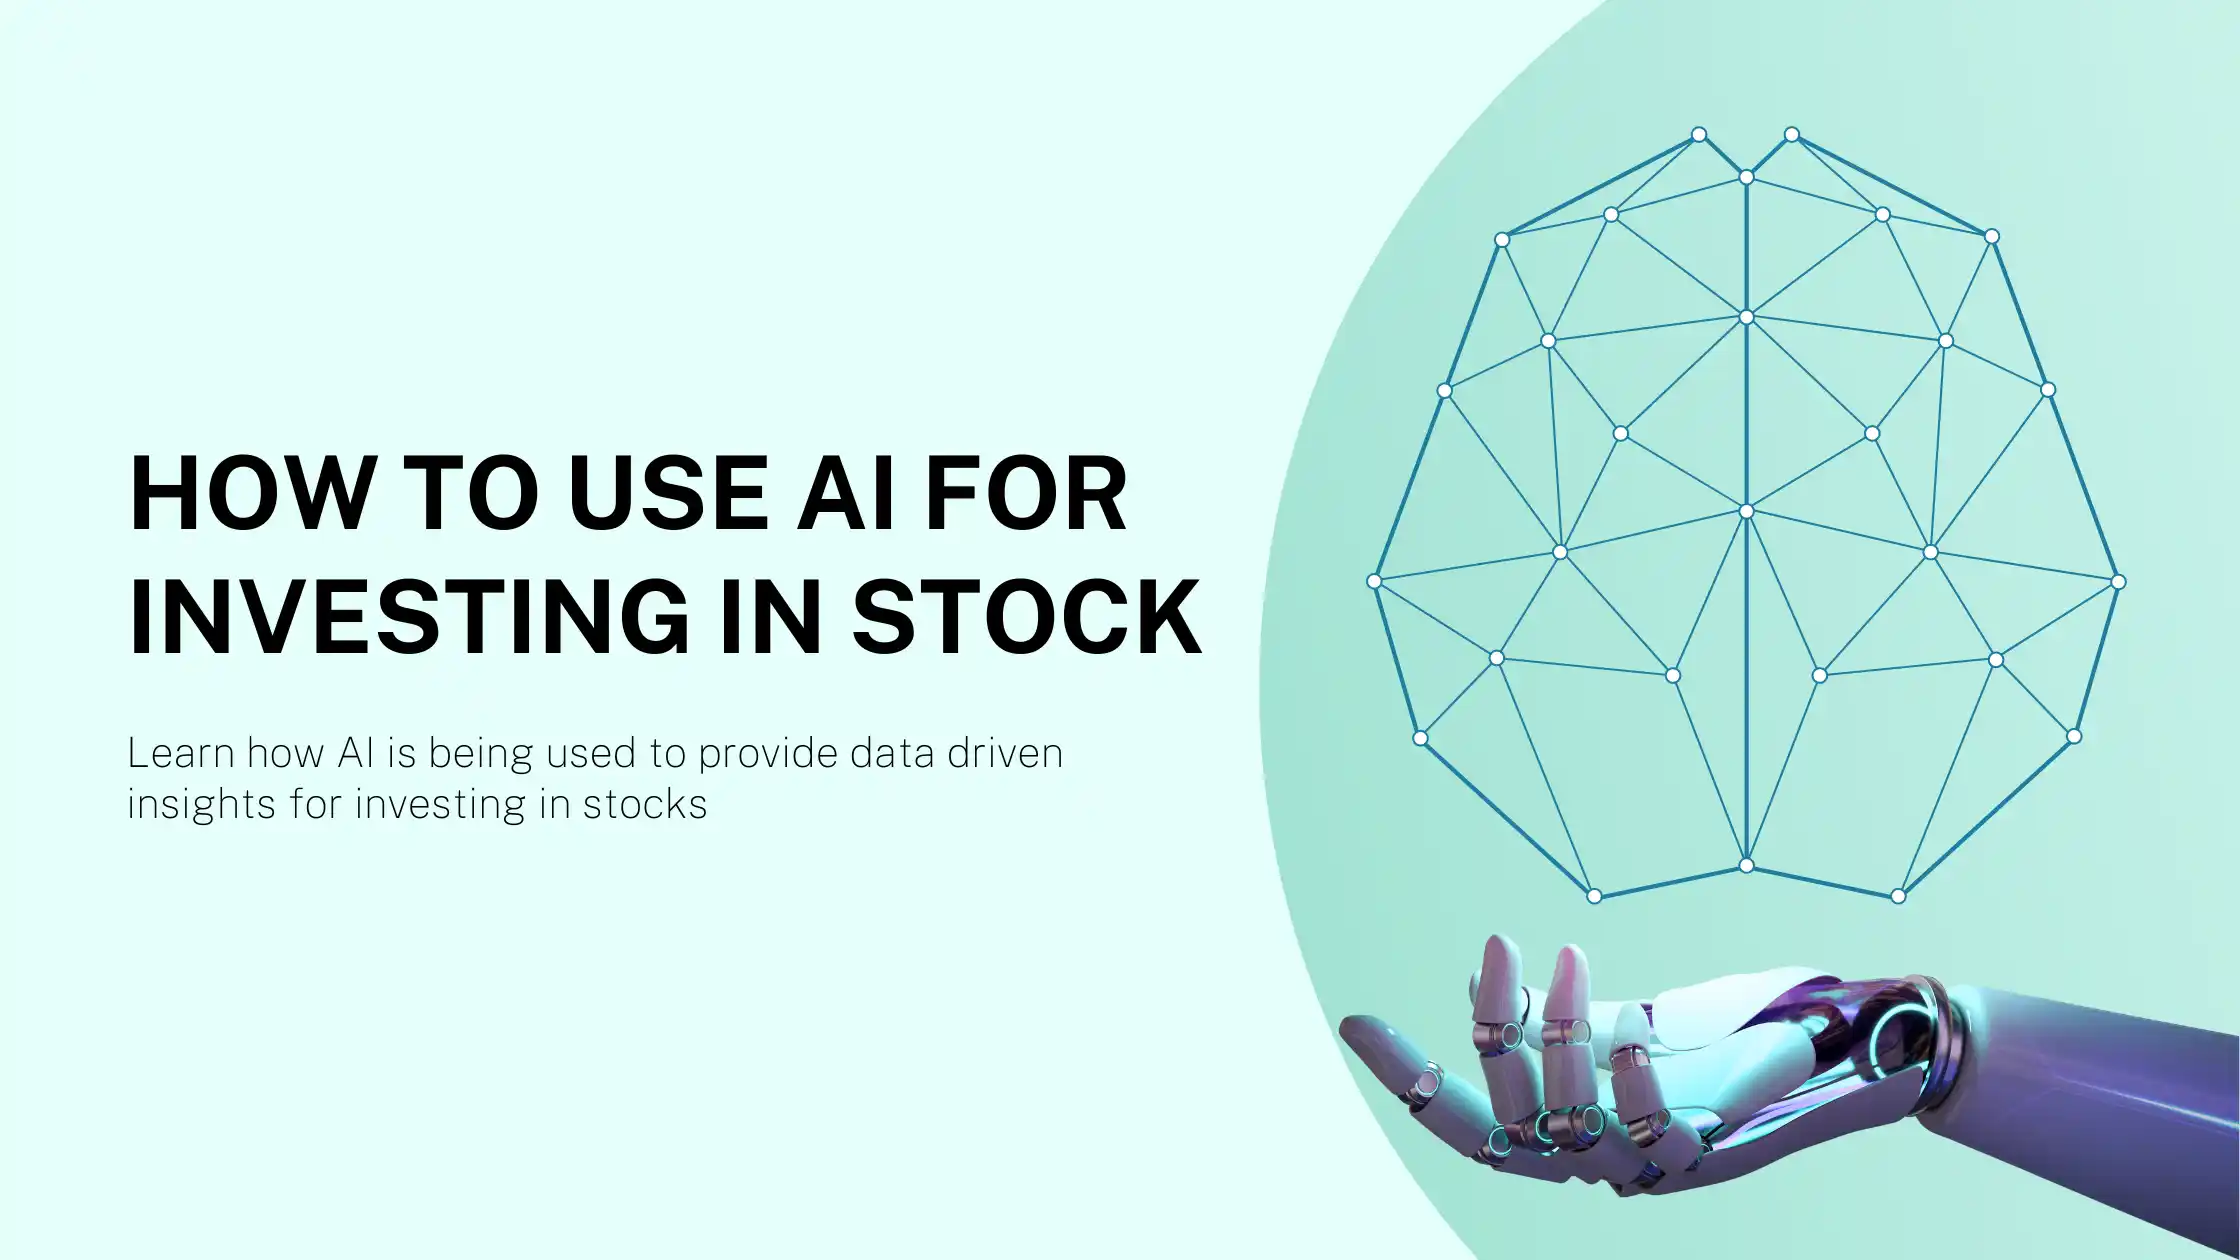 How to use AI for Investing in Stock